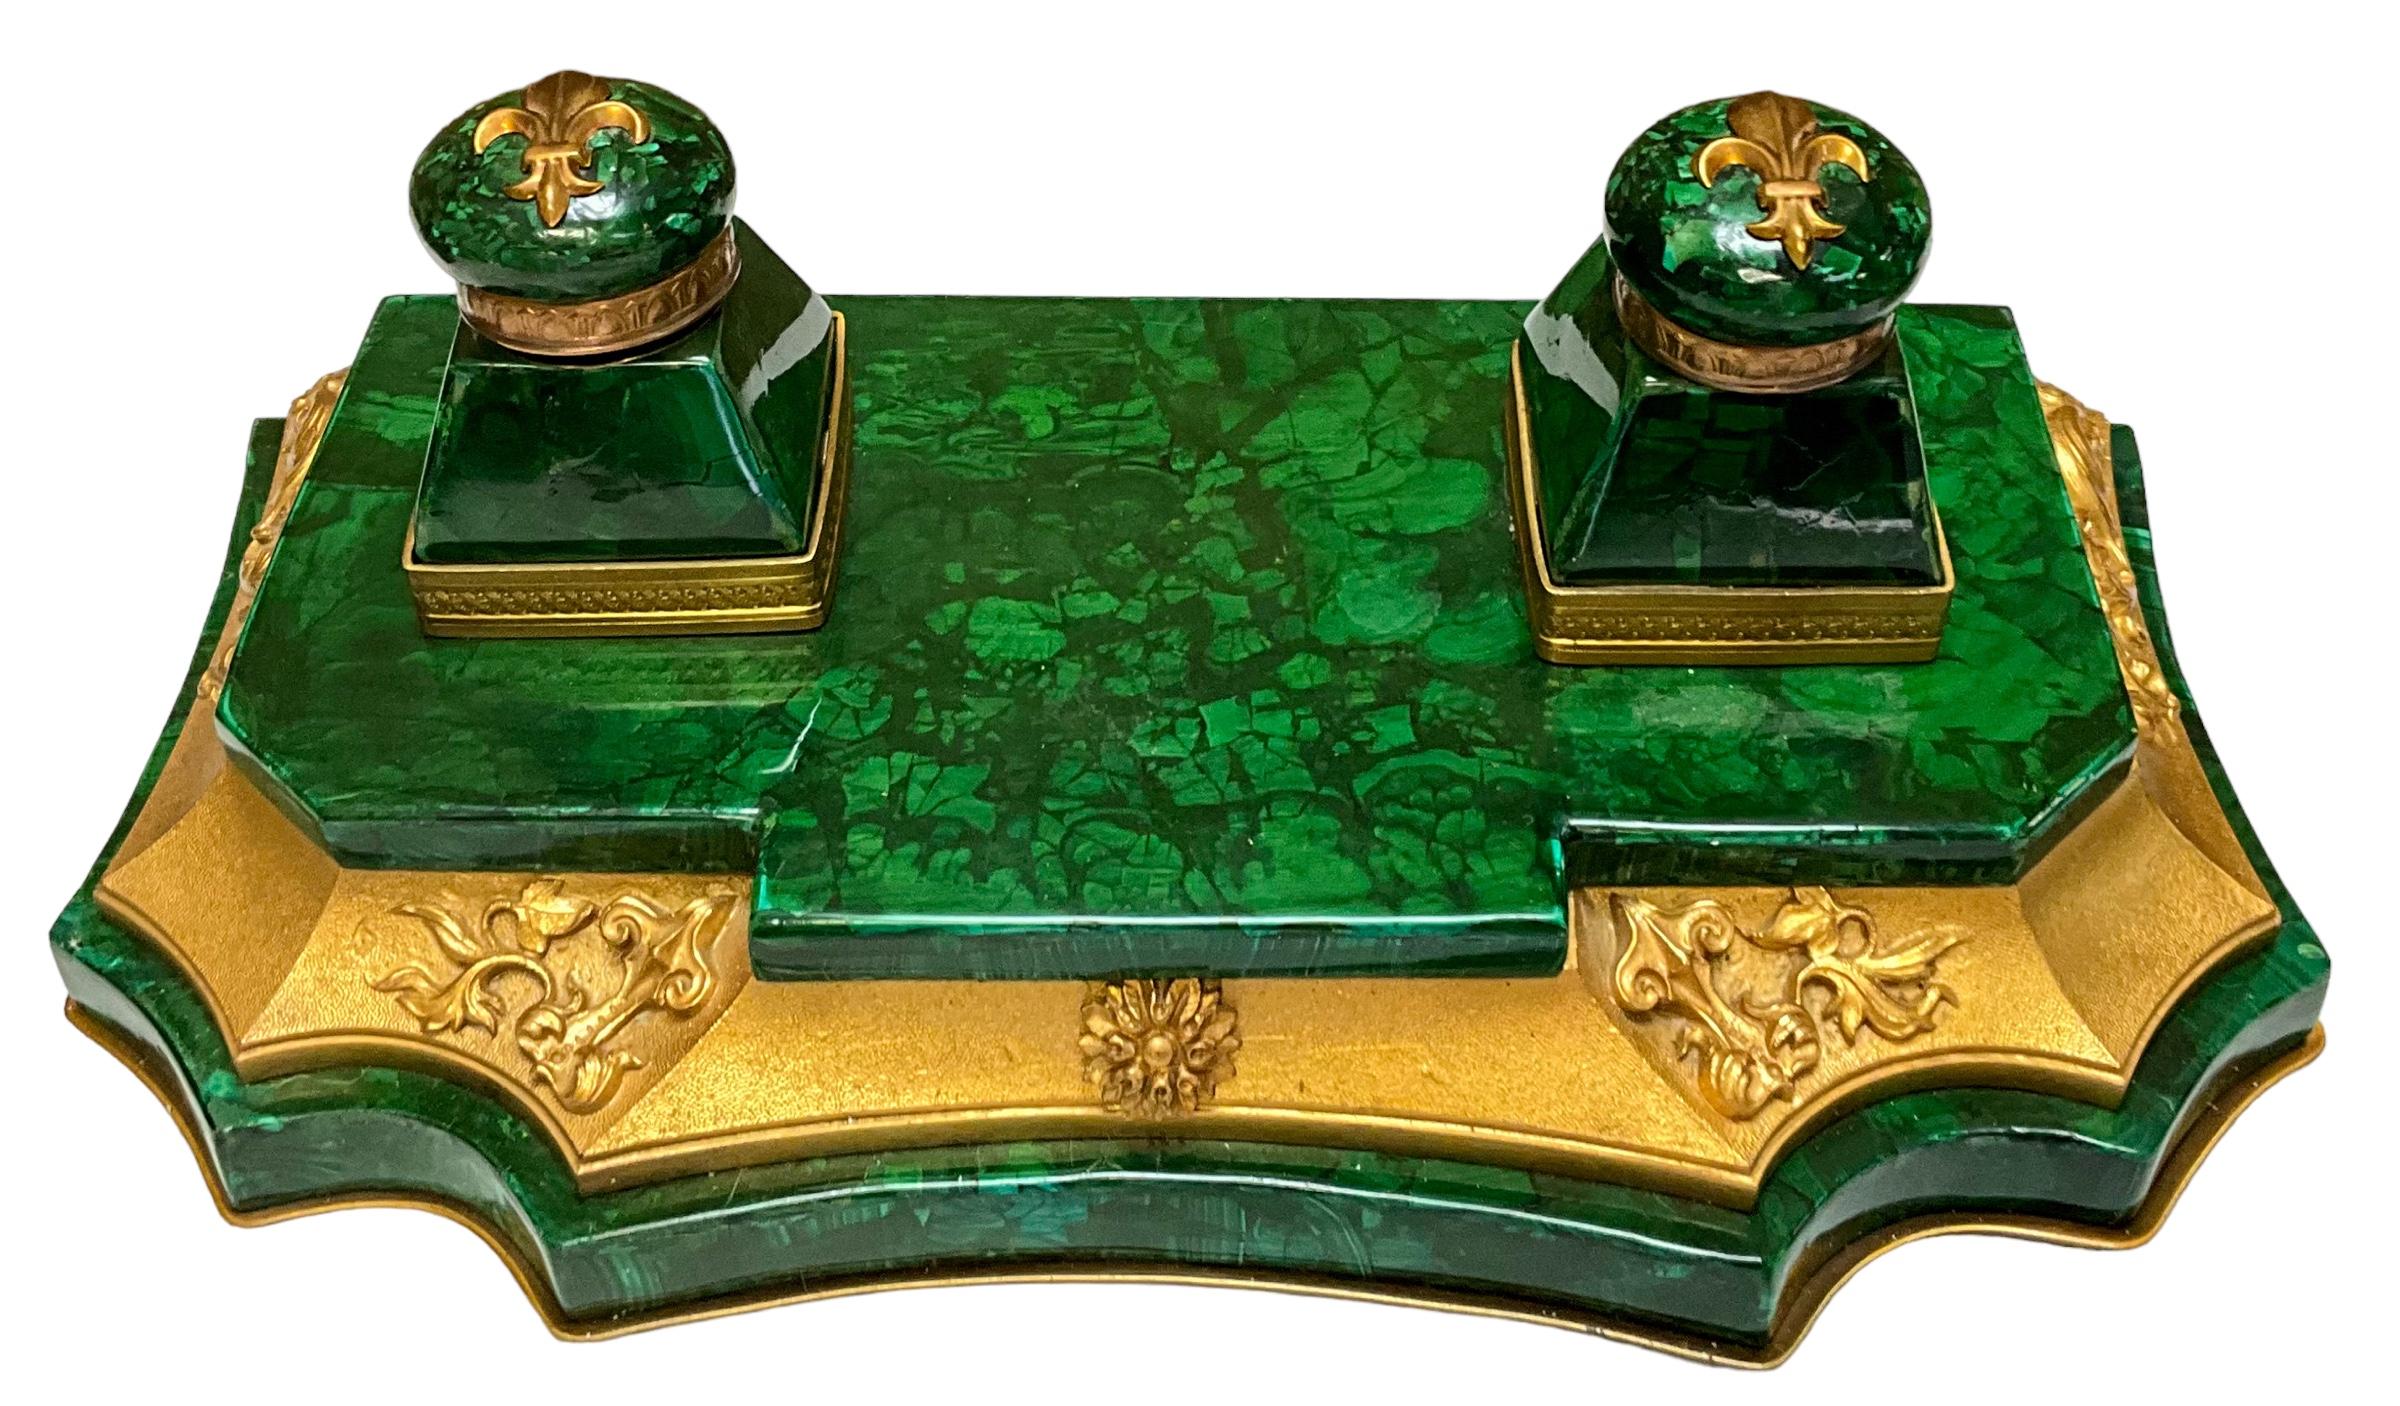 20th Century Early 20th-C. French Gilt Bronze And Malachite Desk Pen Inkwell / Inkstand  For Sale